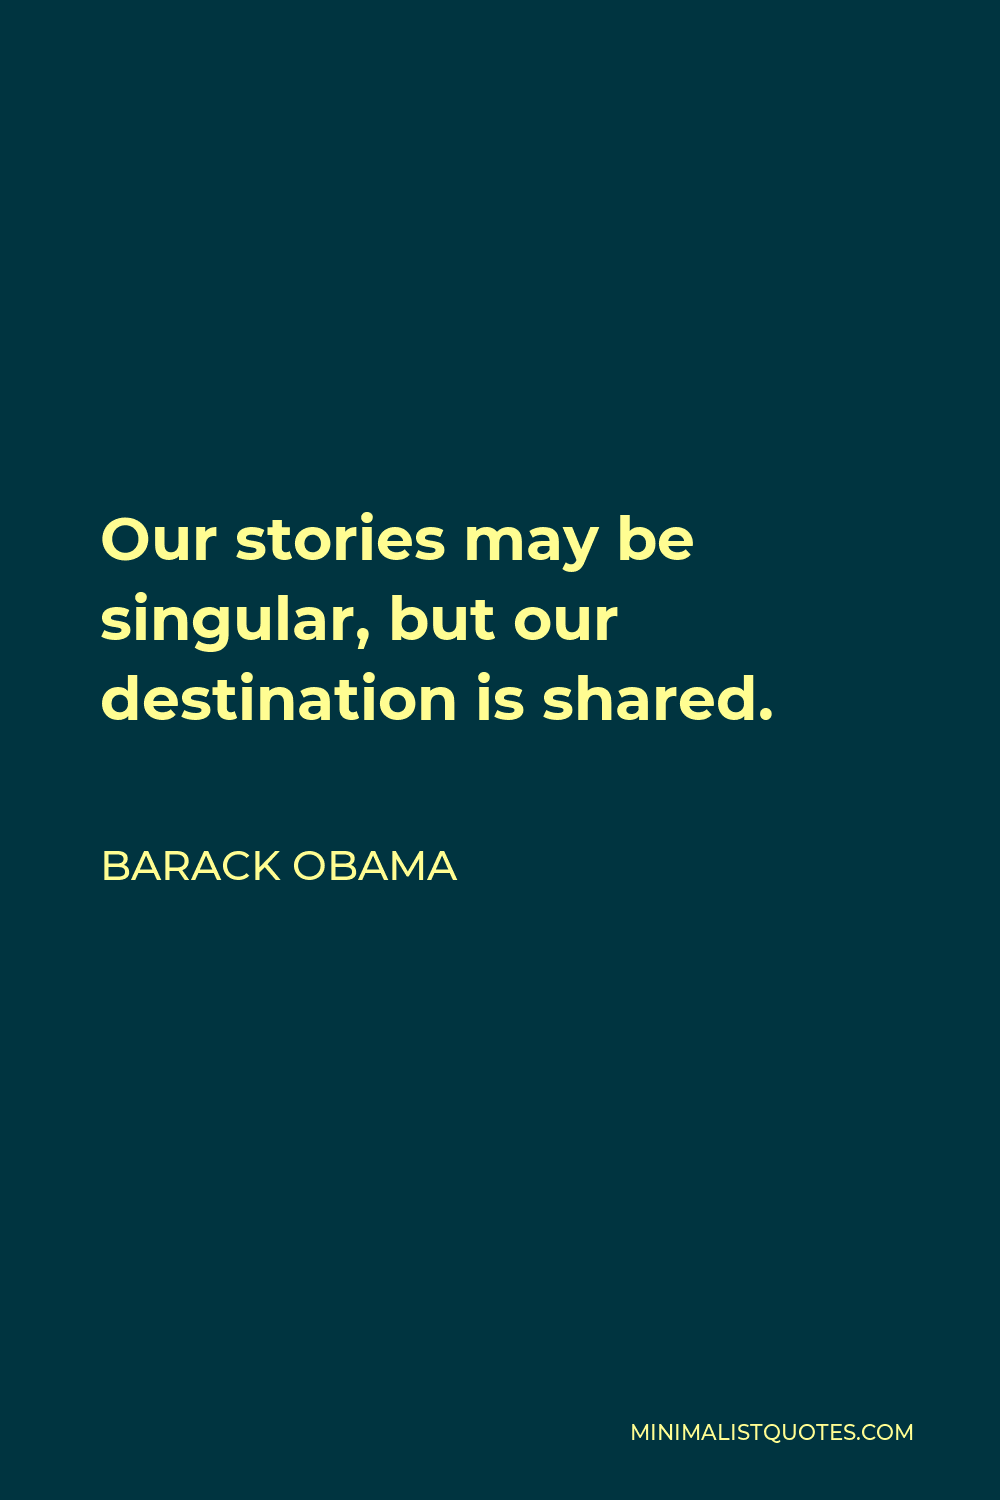 Barack Obama Quote - Our stories may be singular, but our destination is shared.